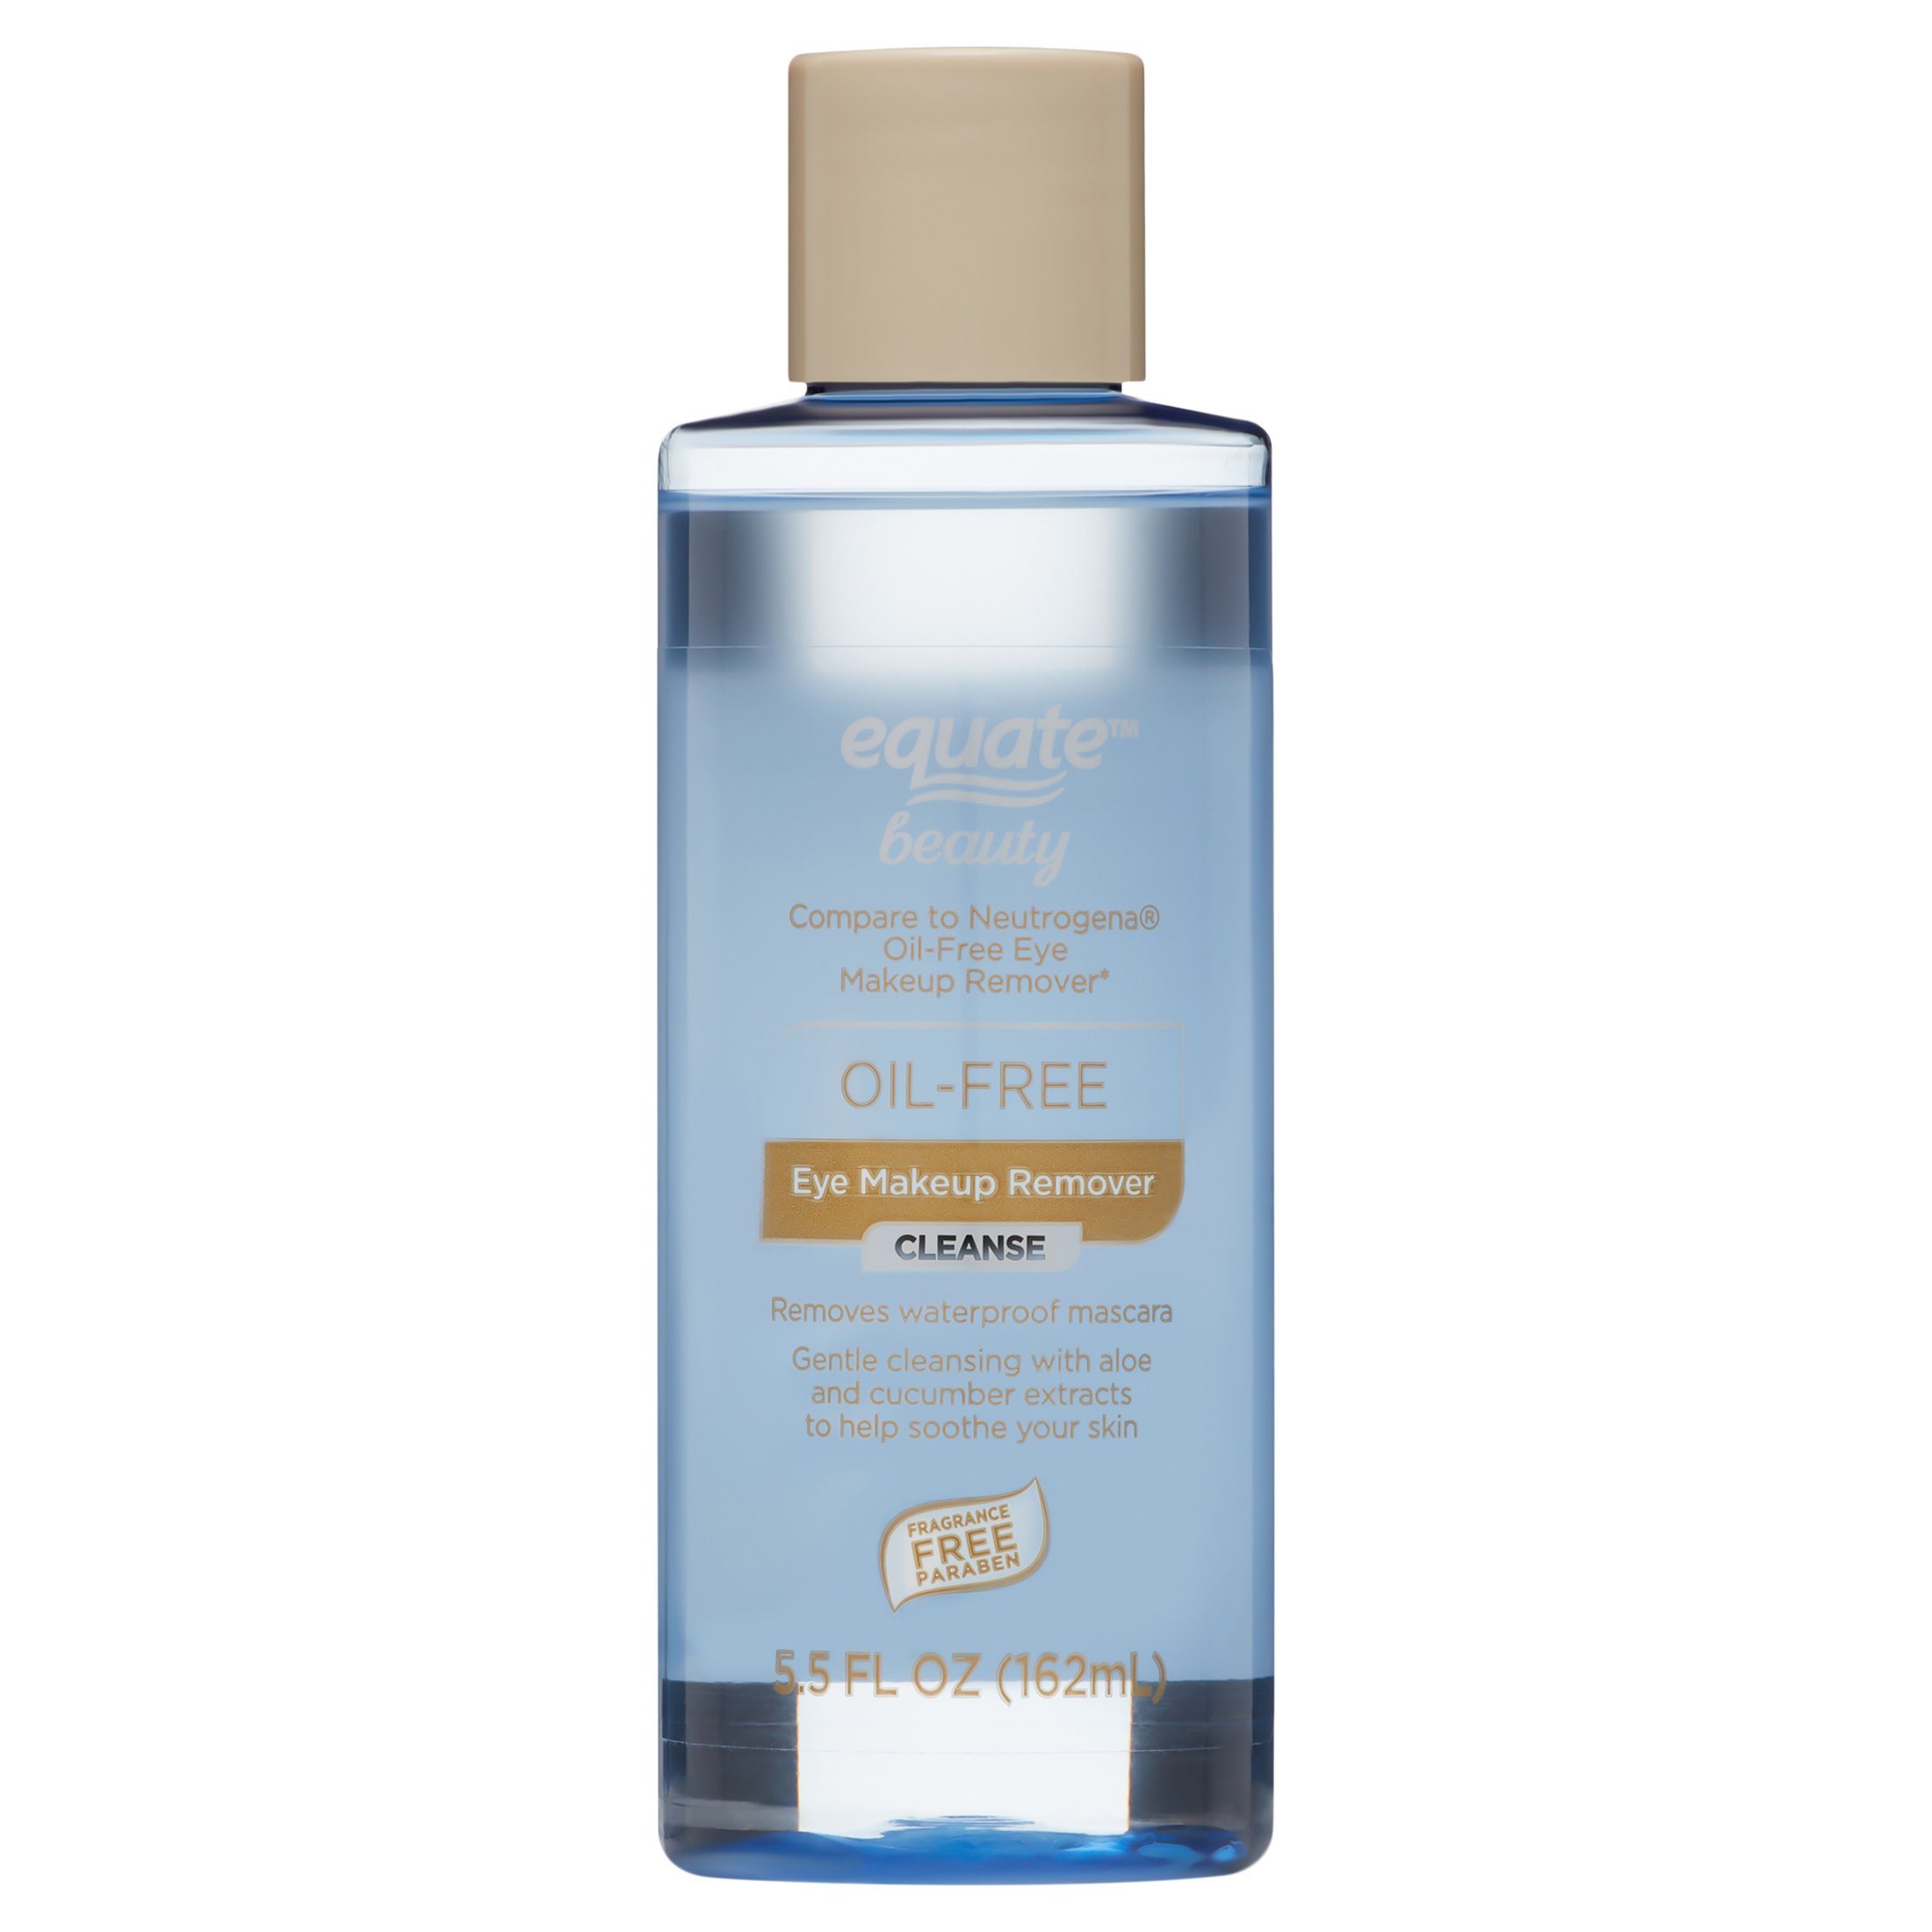 Equate Beauty Oil-Free Eye Makeup Remover, 5.5 Fl oz - image 1 of 7